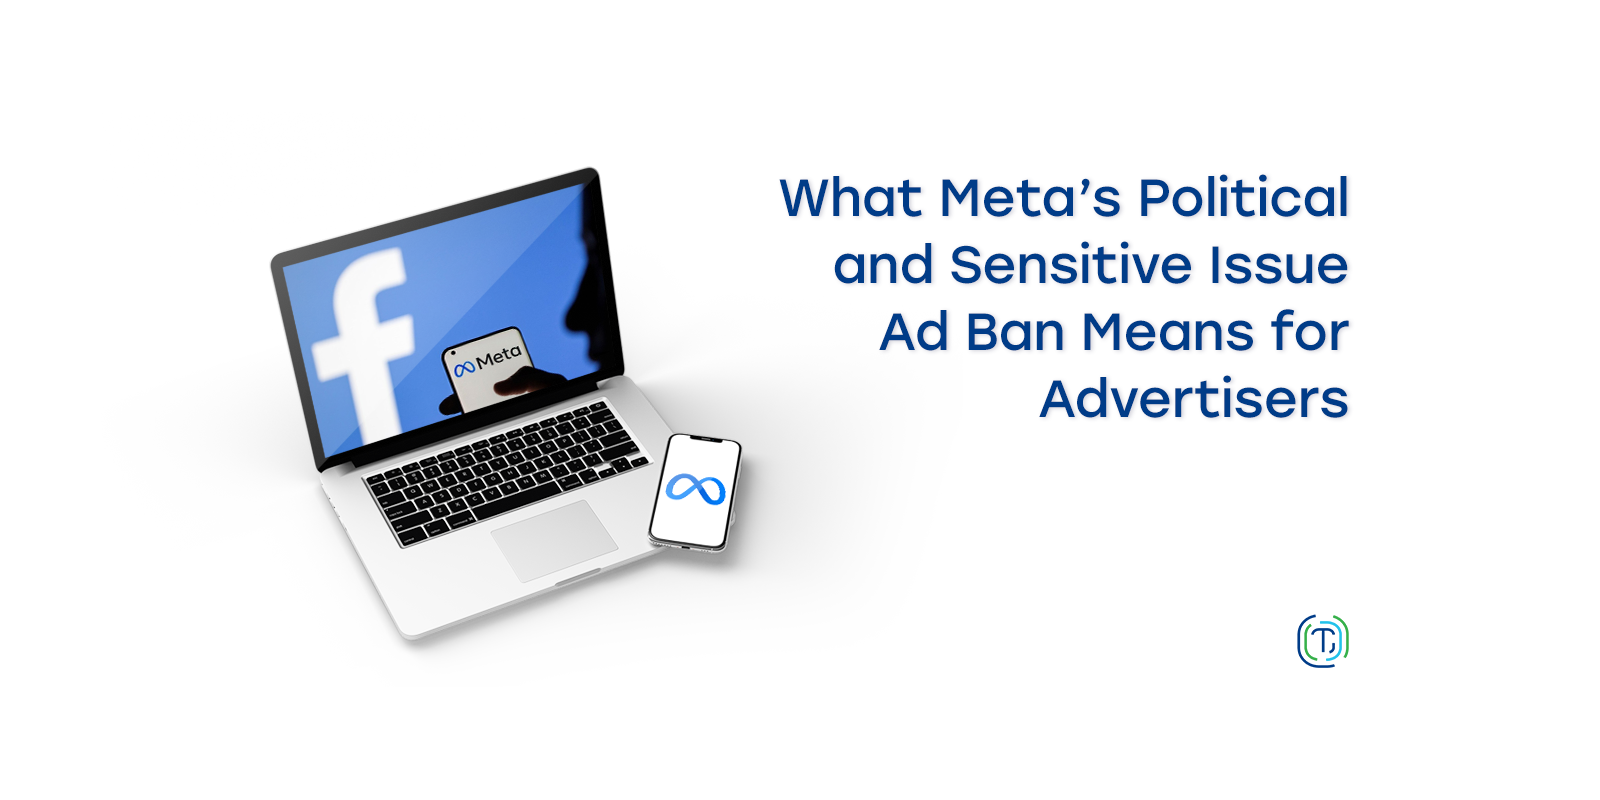 What Meta's Political and Sensitive Ad Ban Means for Advertisers